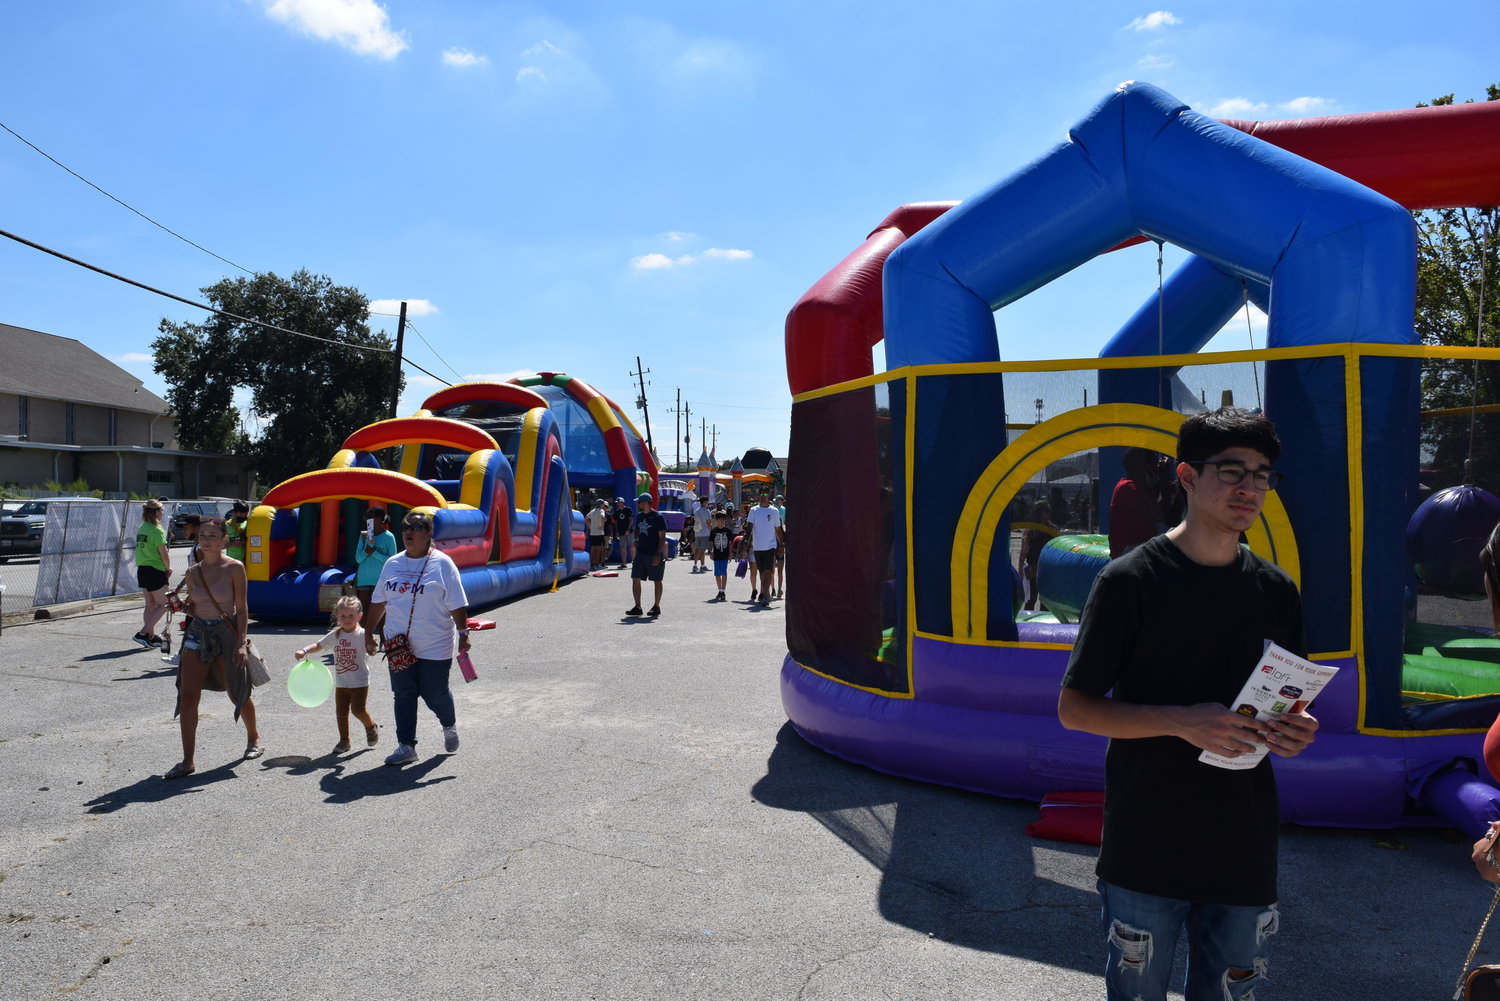 The children and teens area of the festival, just east of KT Antiques included several bounce houses, a live DJ and a child-friendly booth. Throughout the festival, children could be seen playing and having a fun time with their families, including a few babies napping in strollers.